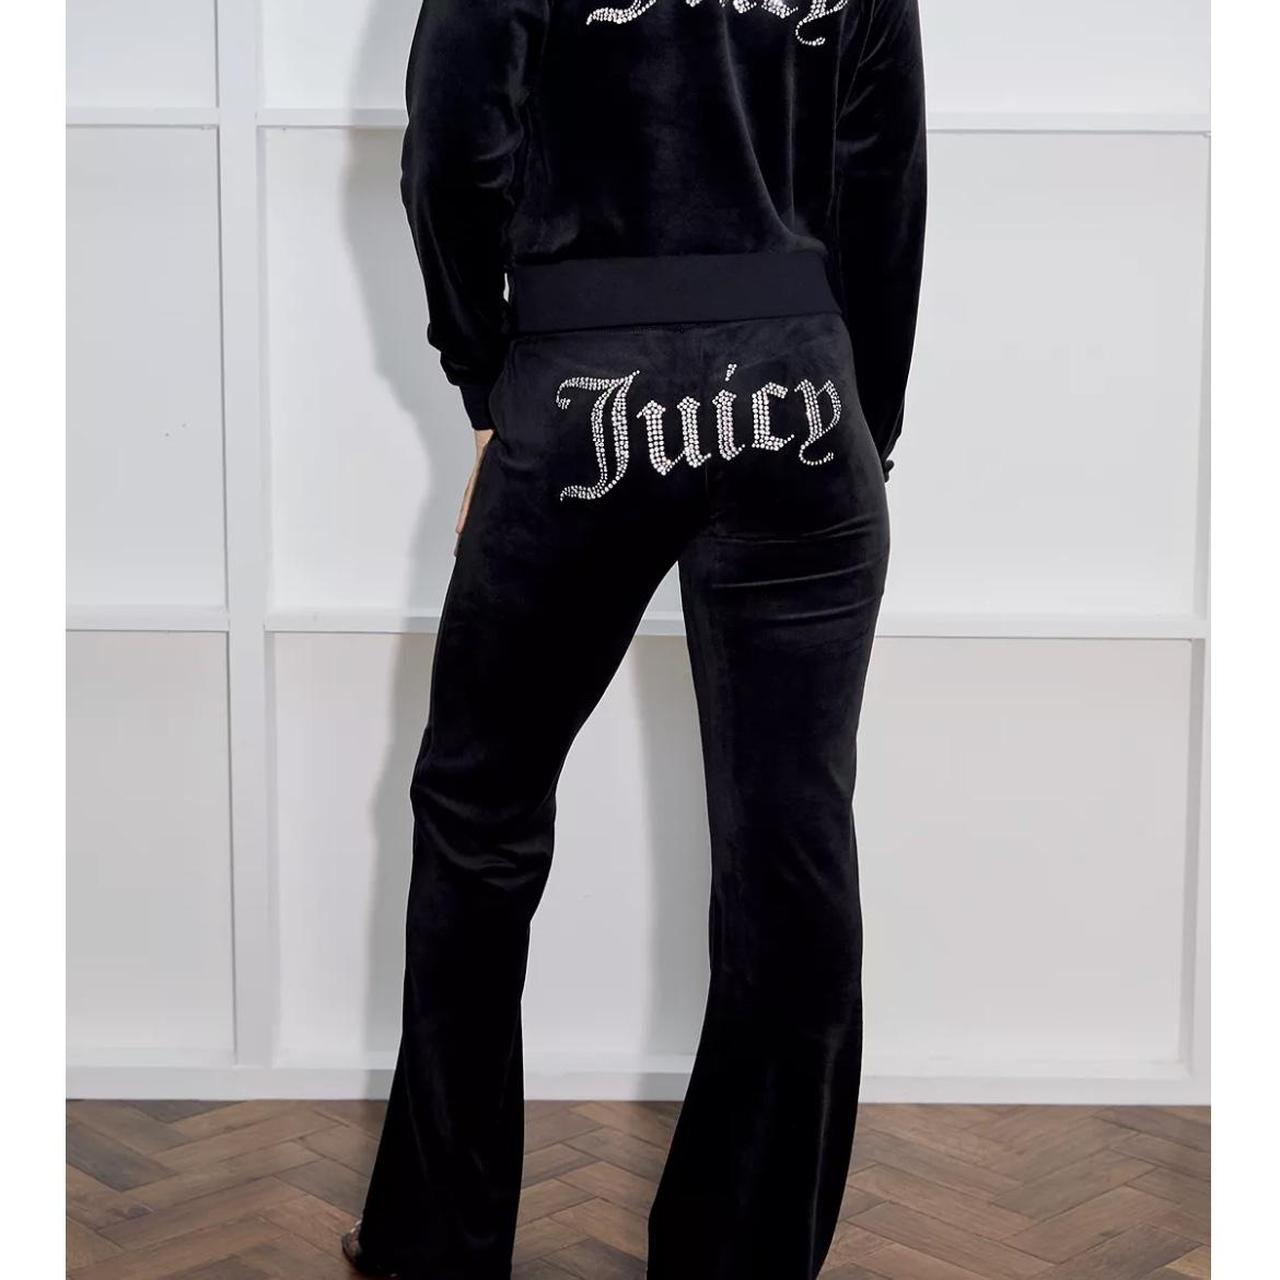 Black velvour Juicy Couture flare track pants from... - Depop